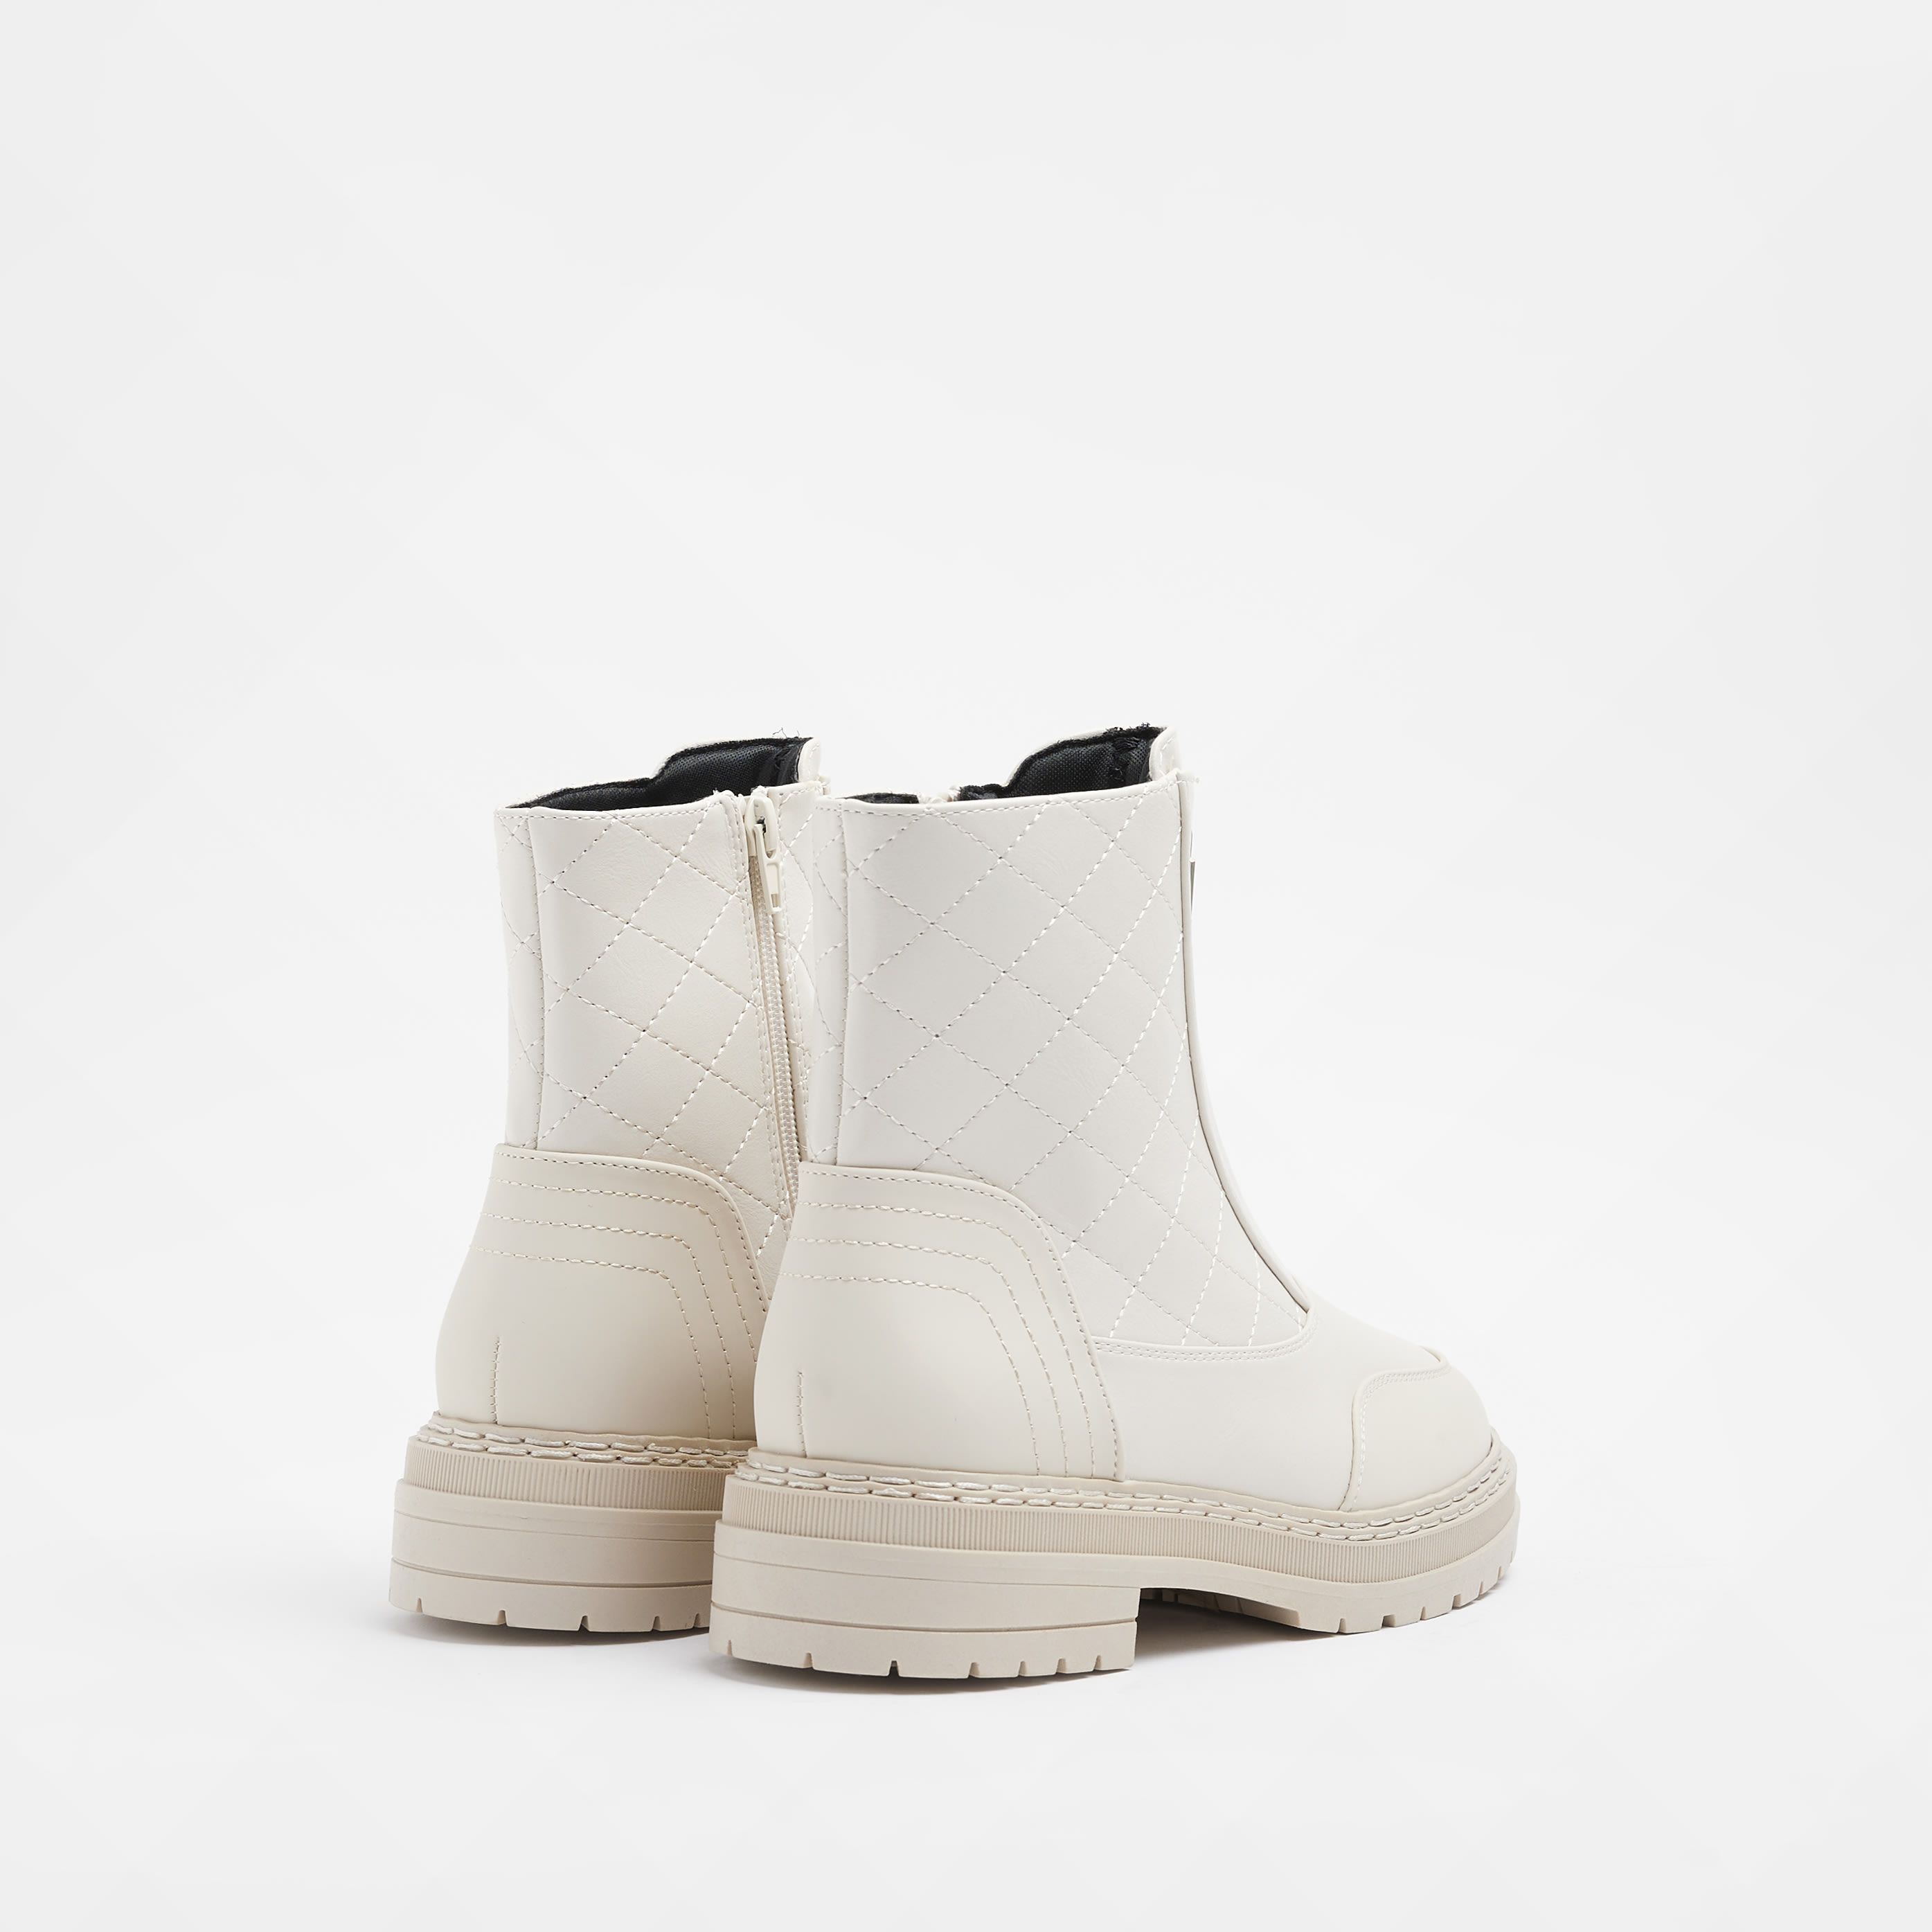 >Brand: River Island>Gender: Women>Type: Boot>Style: Bootie>Occasion: Casual>Pattern: Quilted>Closure: Zip>Fit: Wide>Shoe Width: Wide>Toe Shape: Round Toe>Heel Style: Flat